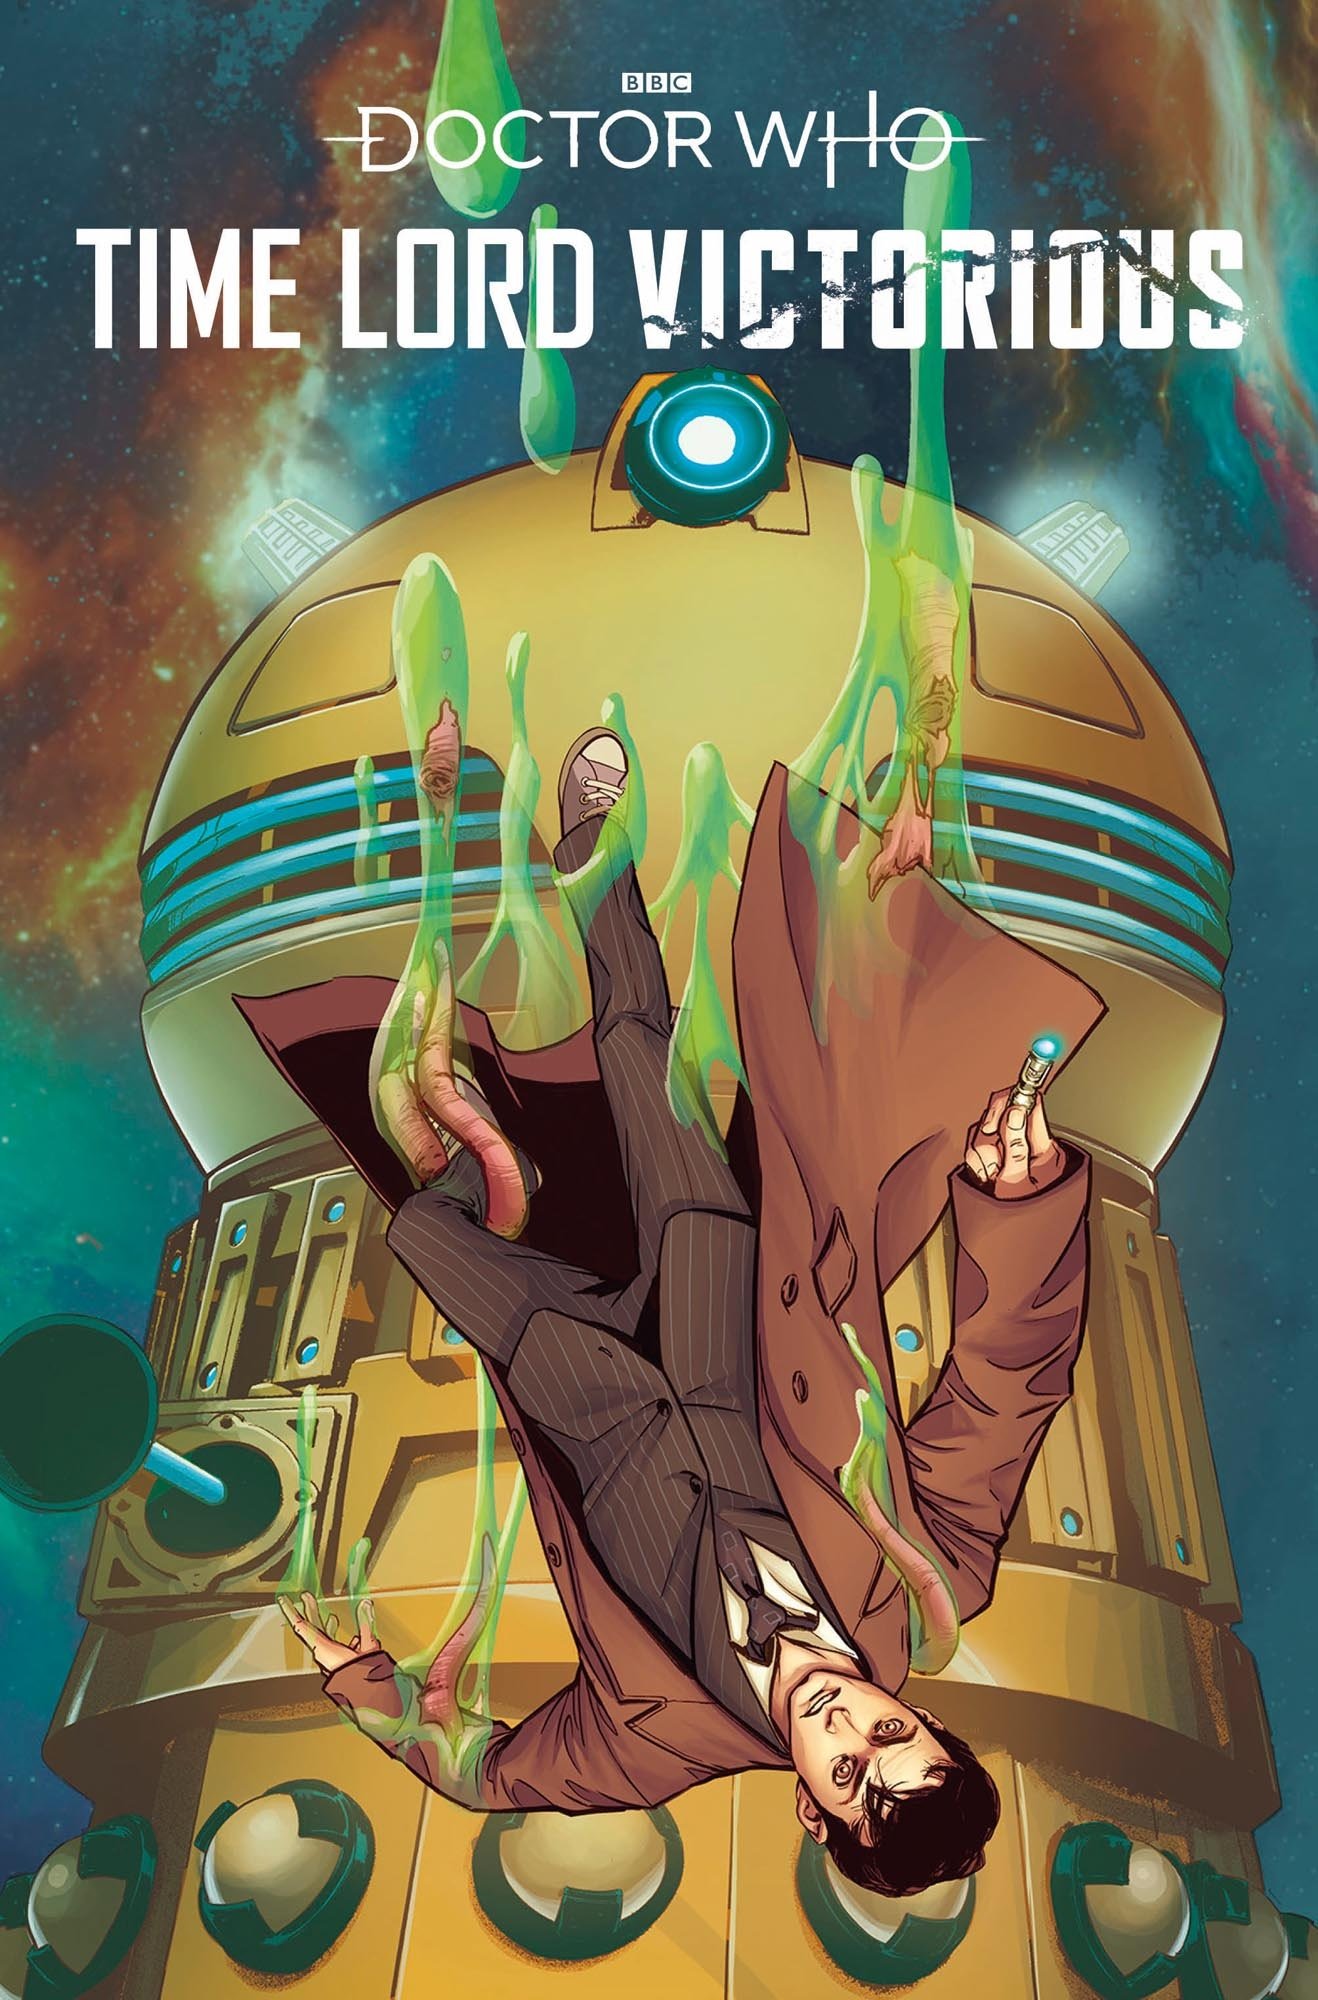 Titan Comics Release Time Lord Victorious Trailer Featuring the Tenth Doctor